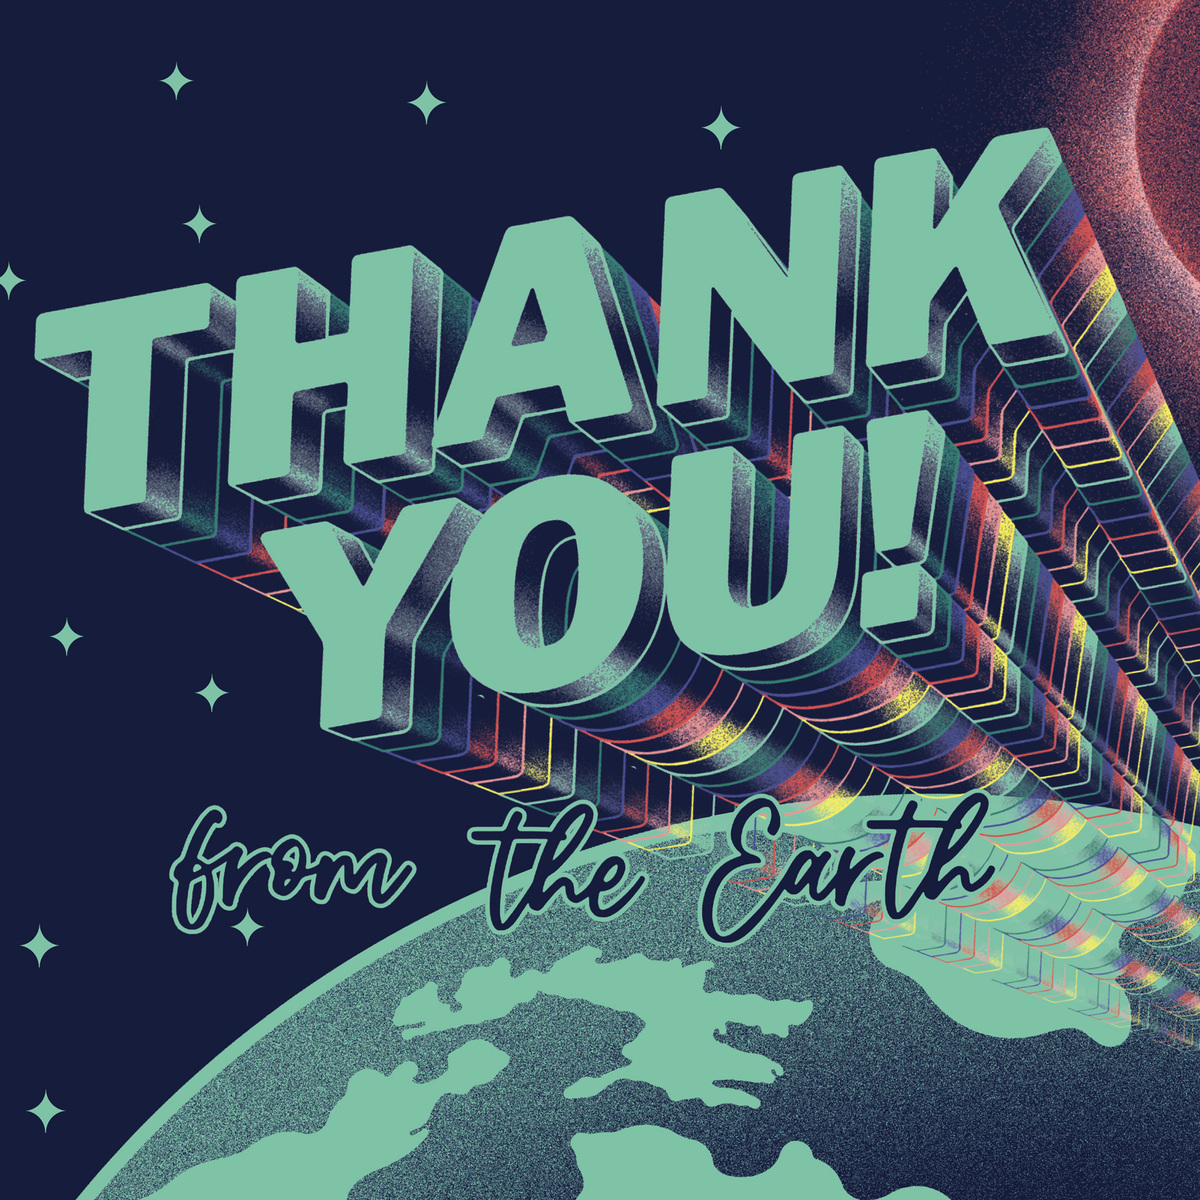 Horizon of the Earth with the sun emerging at a distance, overlaid with bold text saying “Thank you! From the Earth”